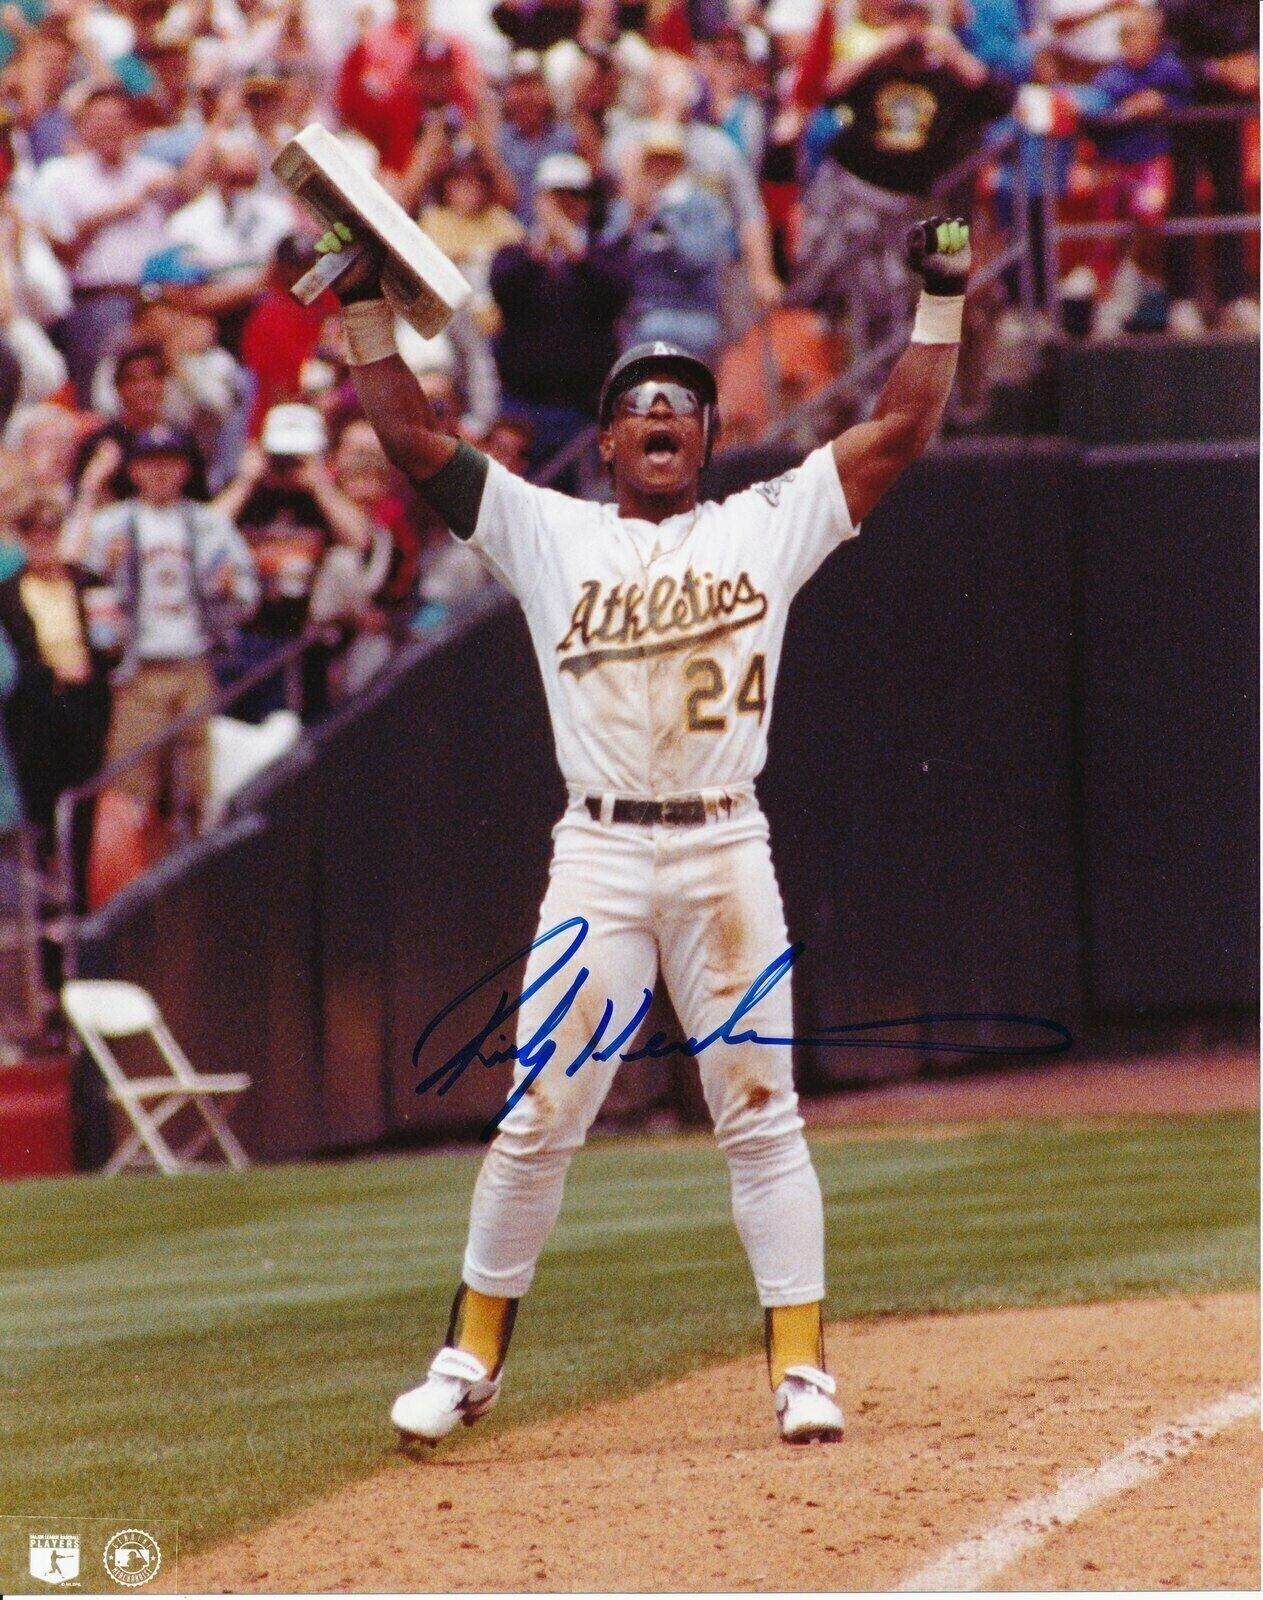 Rickey Henderson Autographed Signed 8x10 Photo Poster painting ( HOF Athletics ) REPRINT